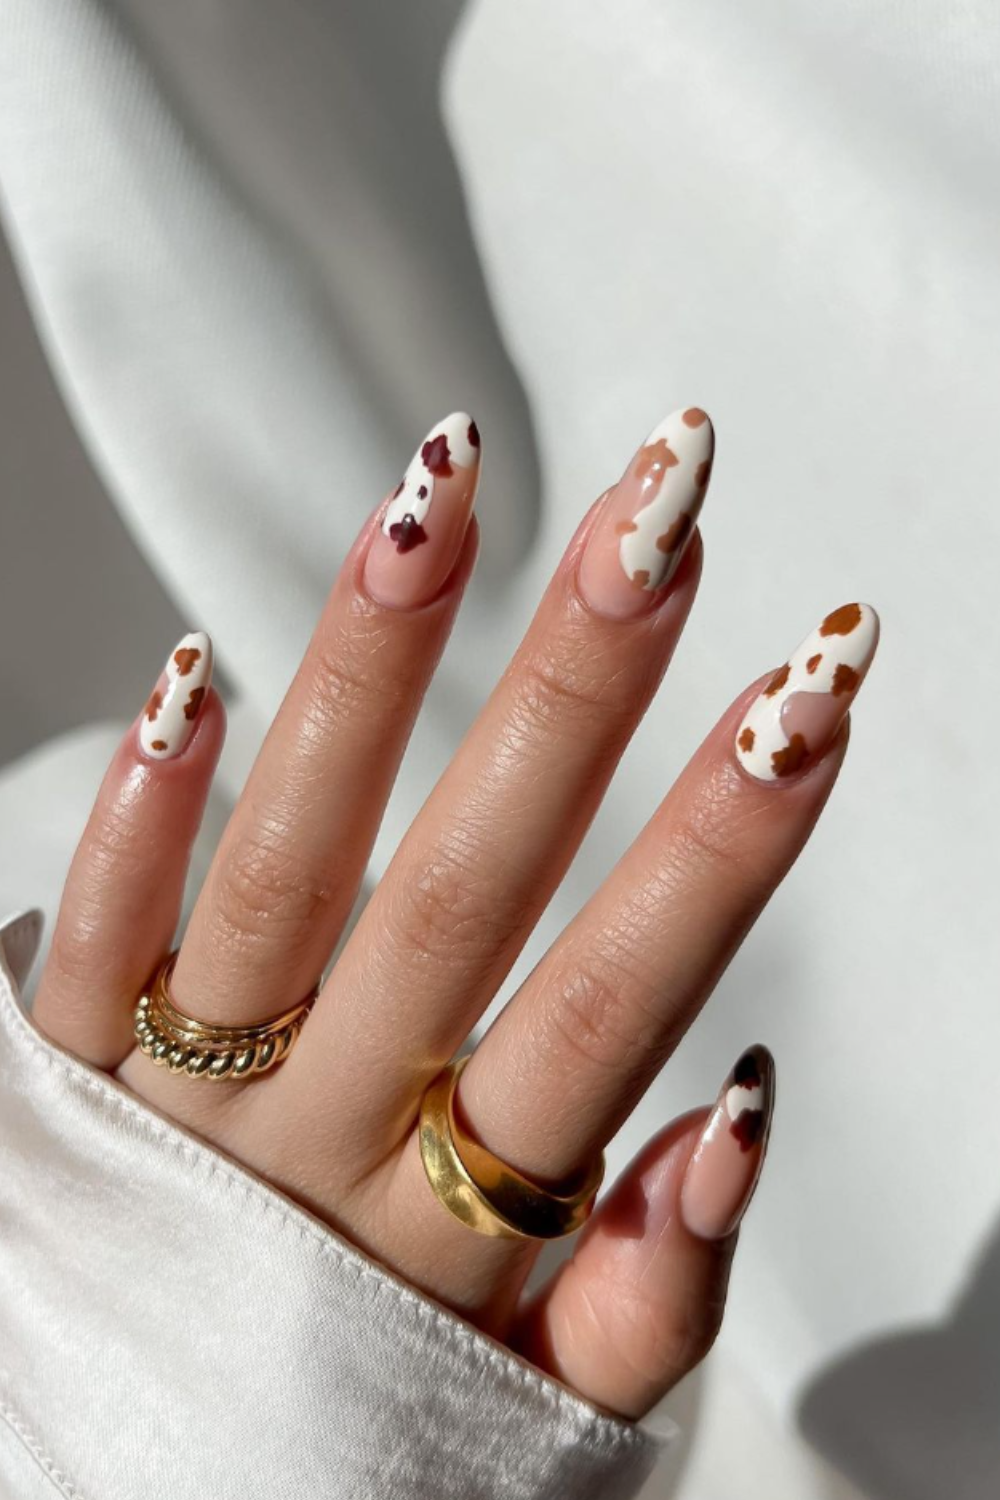 10 Aesthetic Nail Art Designs to Try This Fall | Nail art, Nail designs,  Nail colors